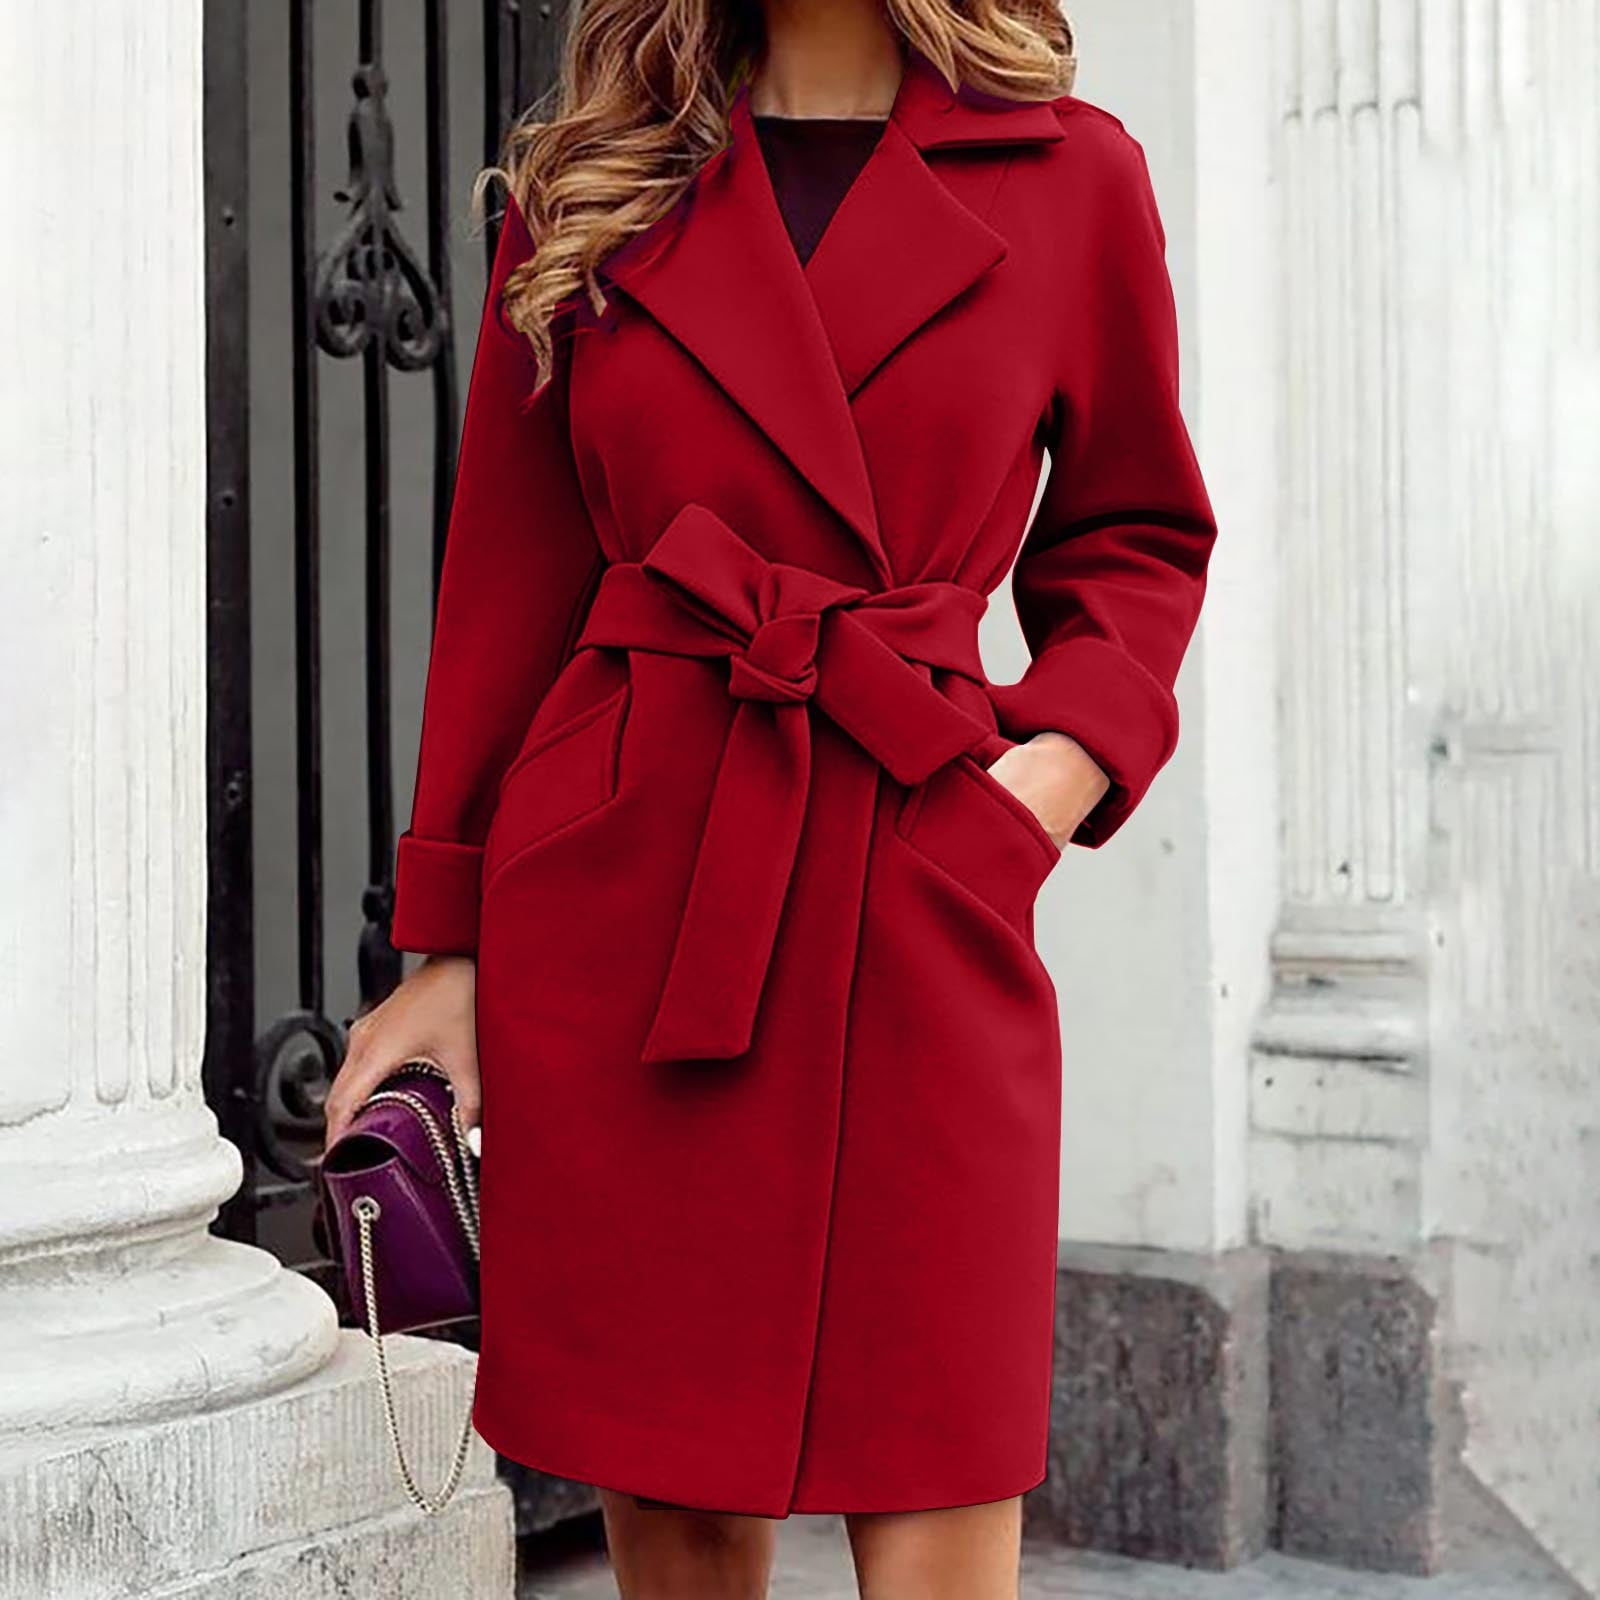 Tagold Fall and Winter Fashion Long Trench Coat, Fall Clothes for Women  2022, Women Outfits Top Lapel Long Sleeve Solid Outerwear Jackets Tops  Coats